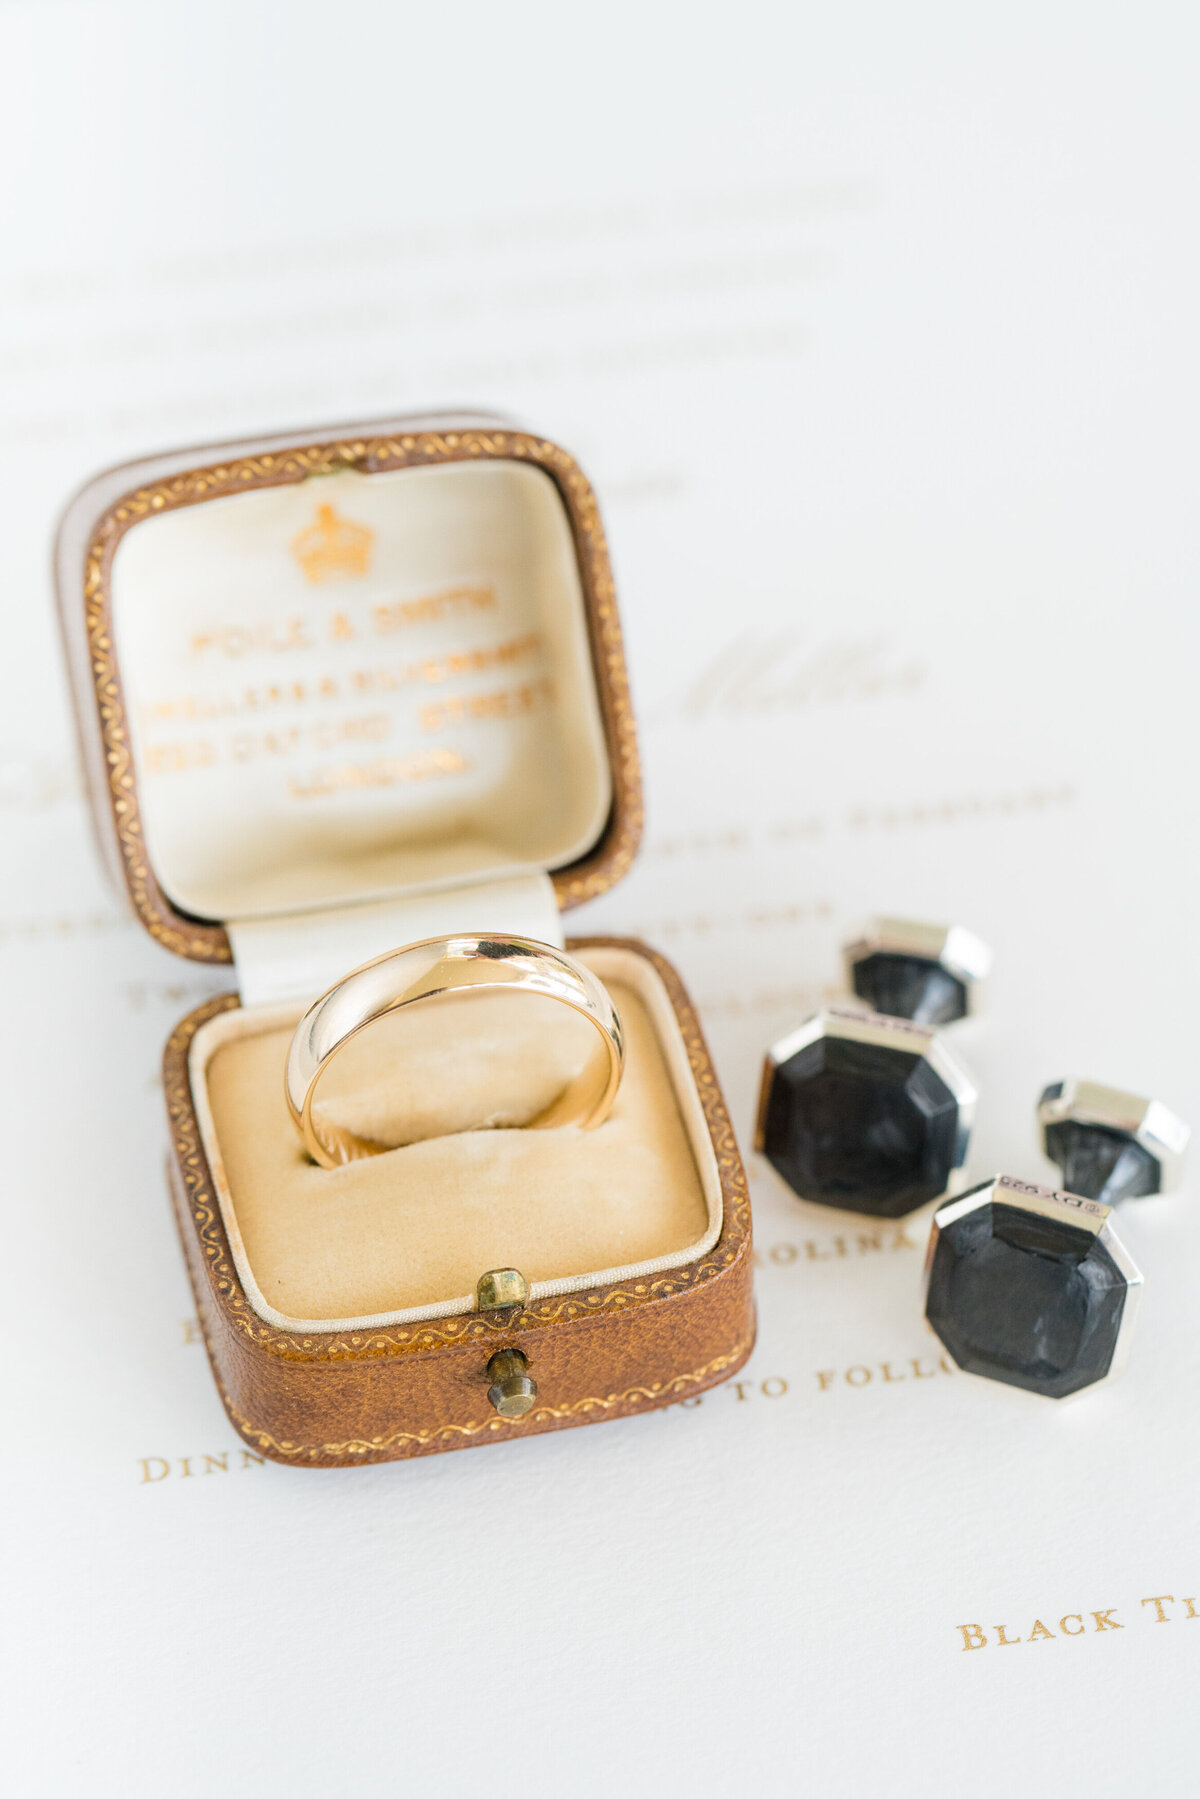 groom's gold wedding band and cufflinks styled on invitation